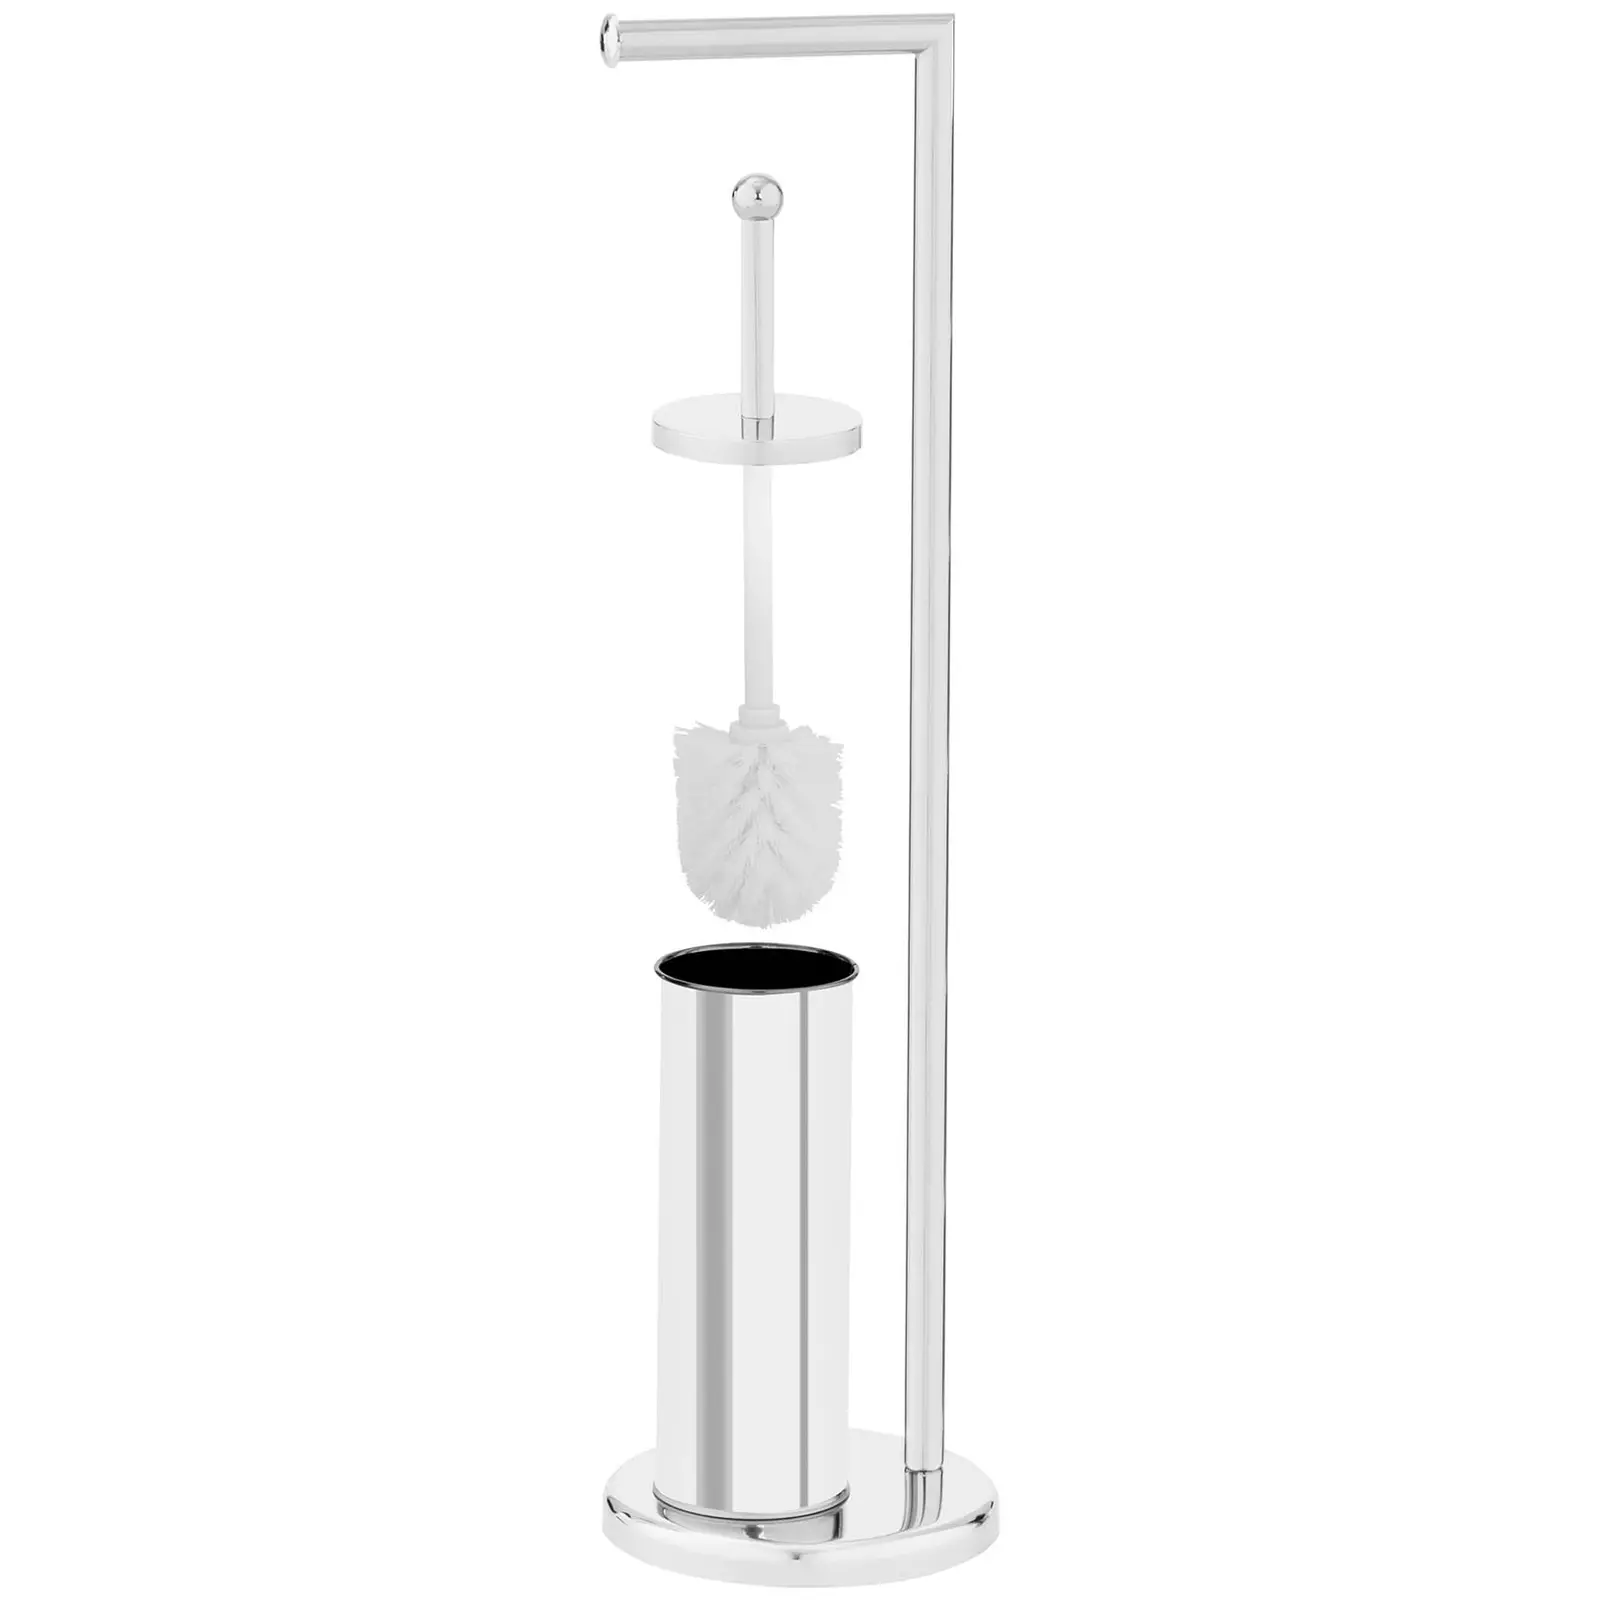 Stainless Steel Toilet Roll Holder - with toilet brush and holder